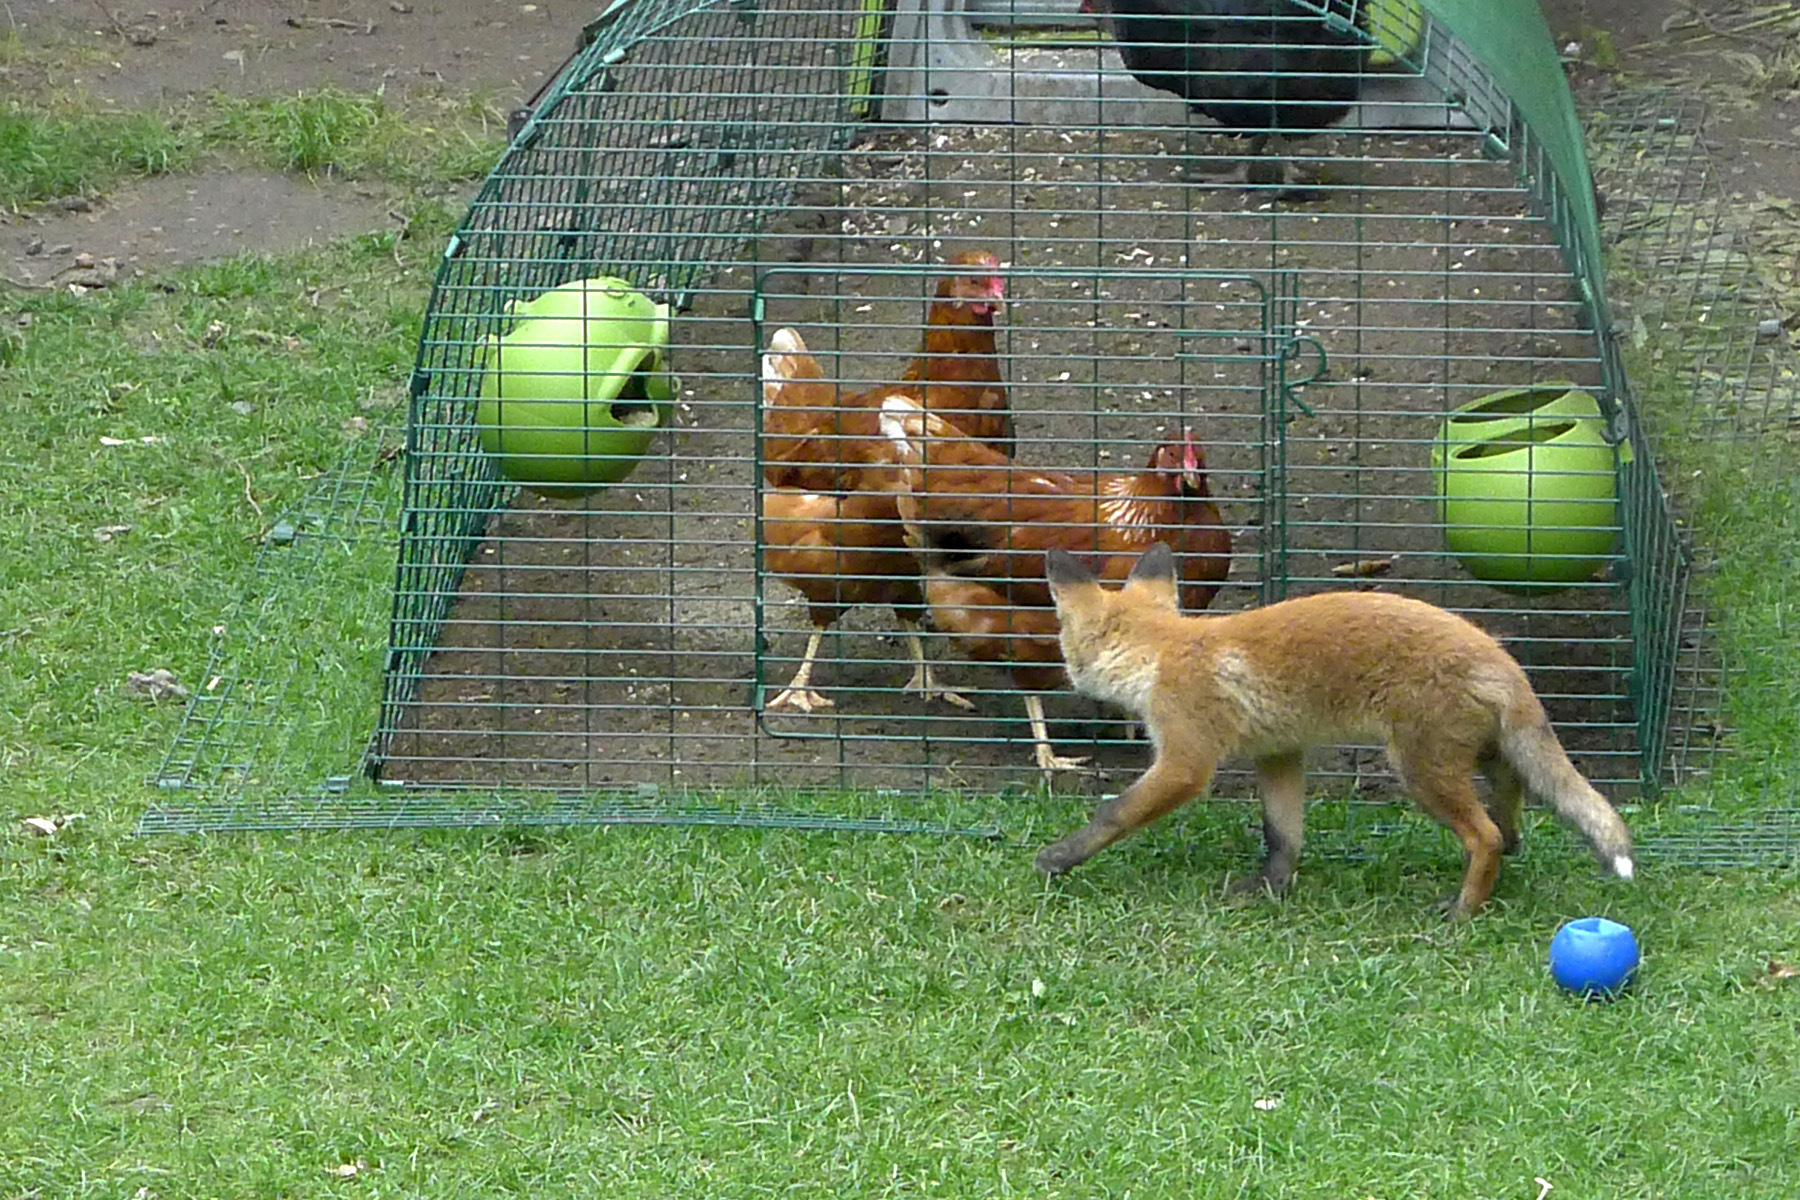 Lisa Thomas' Eglu Classic and Run keeps her chickens safe and foxes at bay